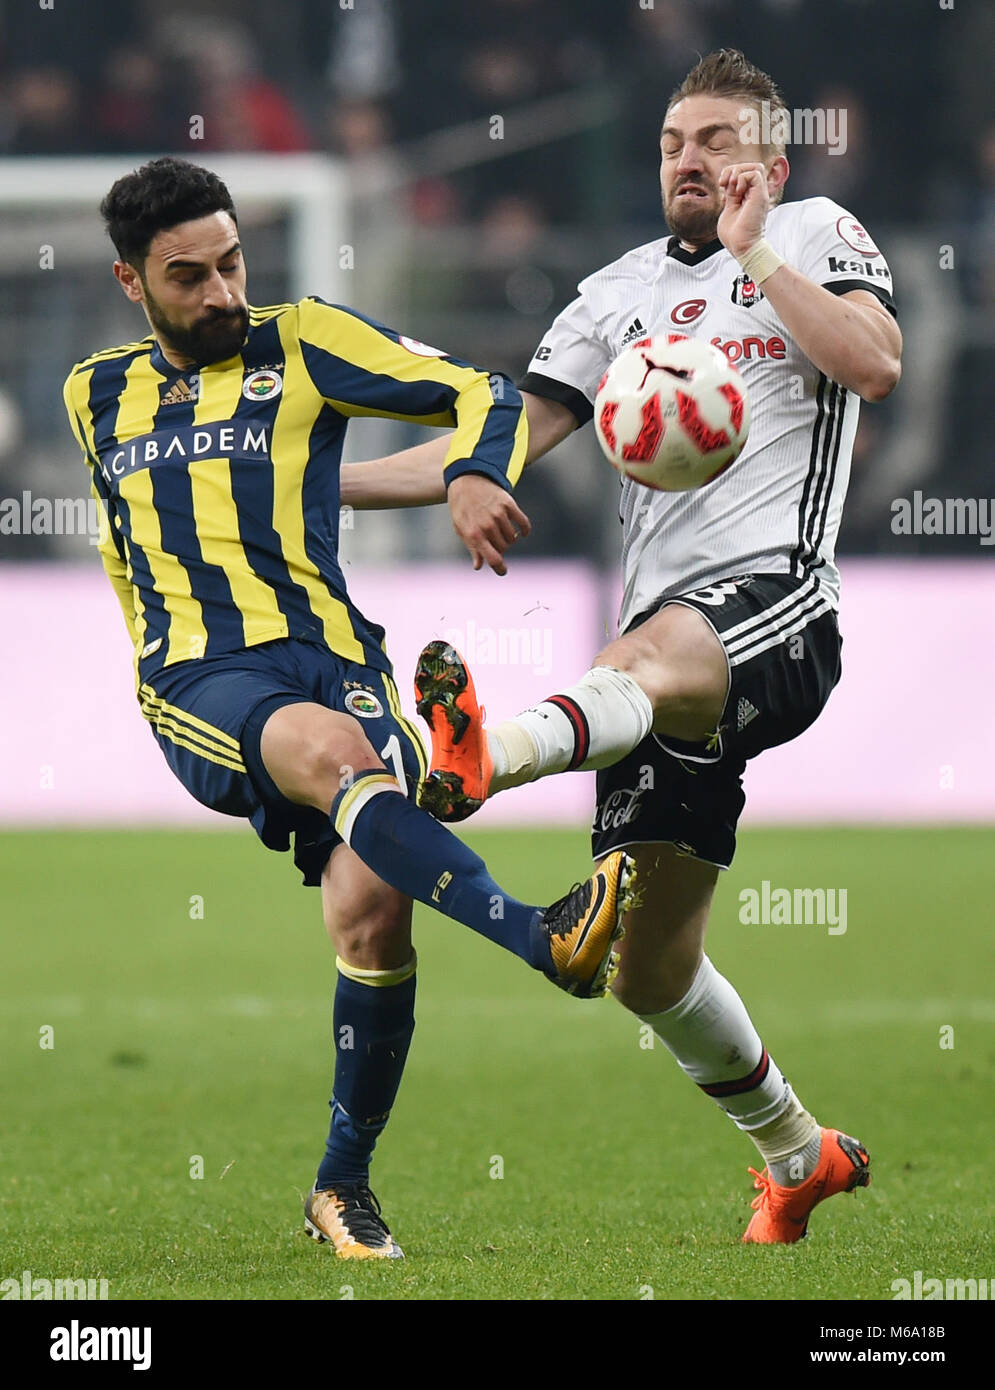 Roman Neustädter of Fenerbahce SK during the Ziraat Turkish Cup match  Photo d'actualité - Getty Images